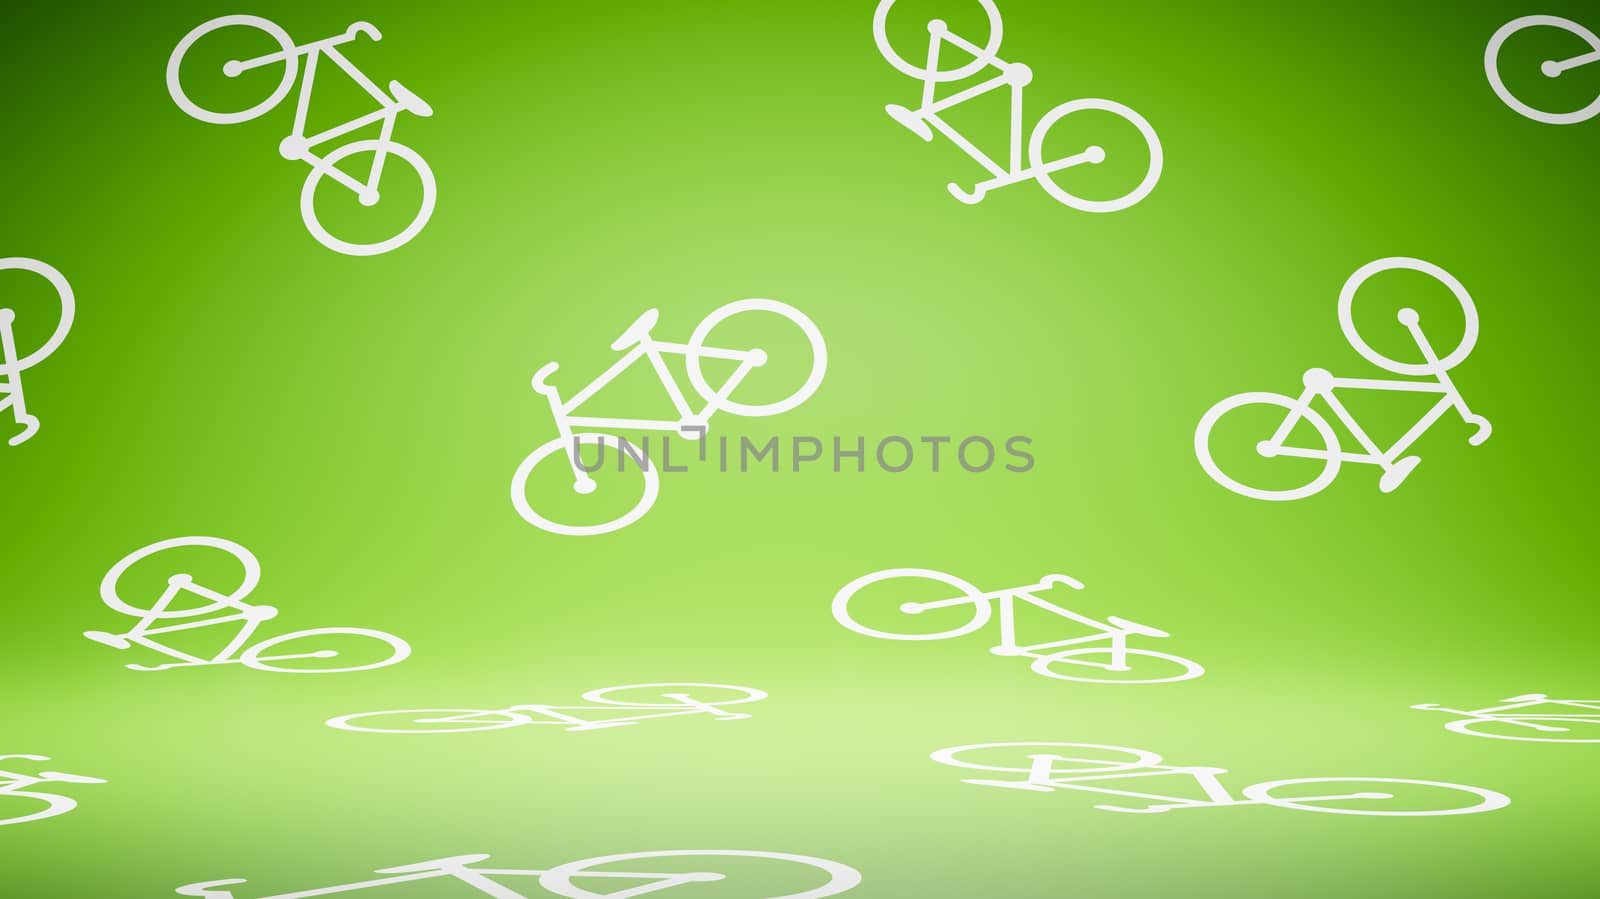 Empty Blank Green and White Bicycle Pattern Studio Background 3D Render Illustration